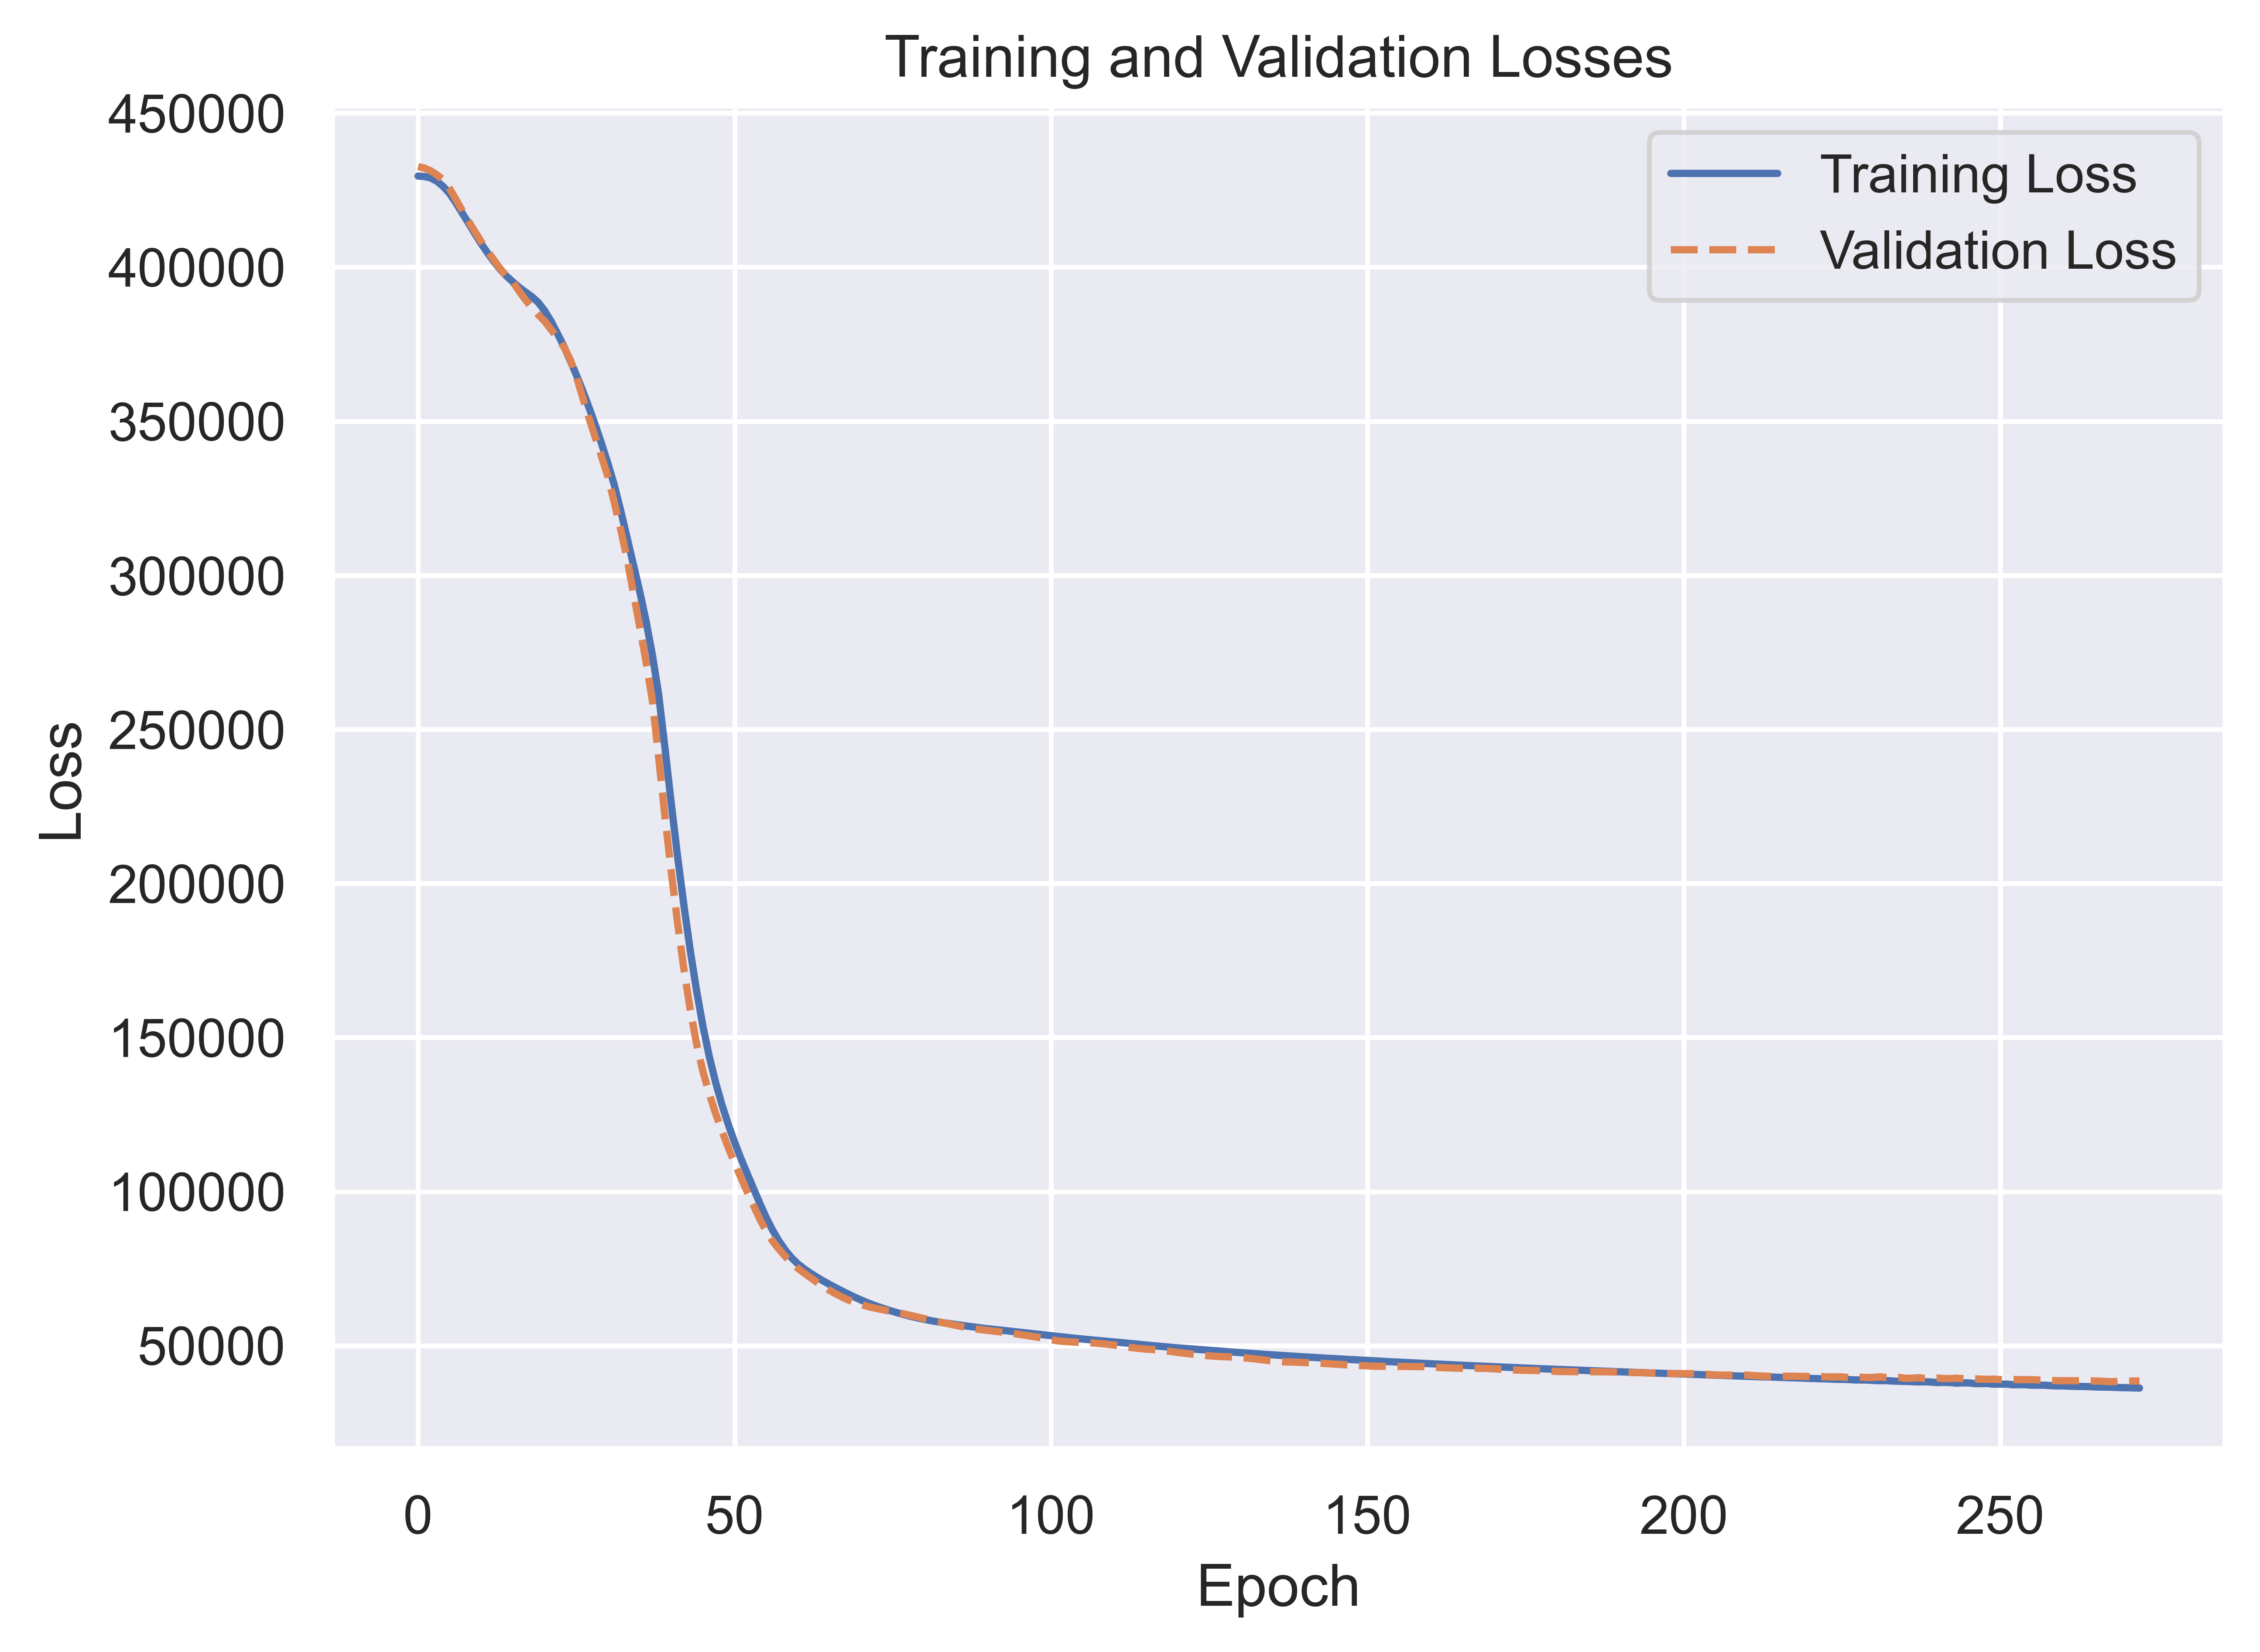 Plot showing training and validation loss during model fitment